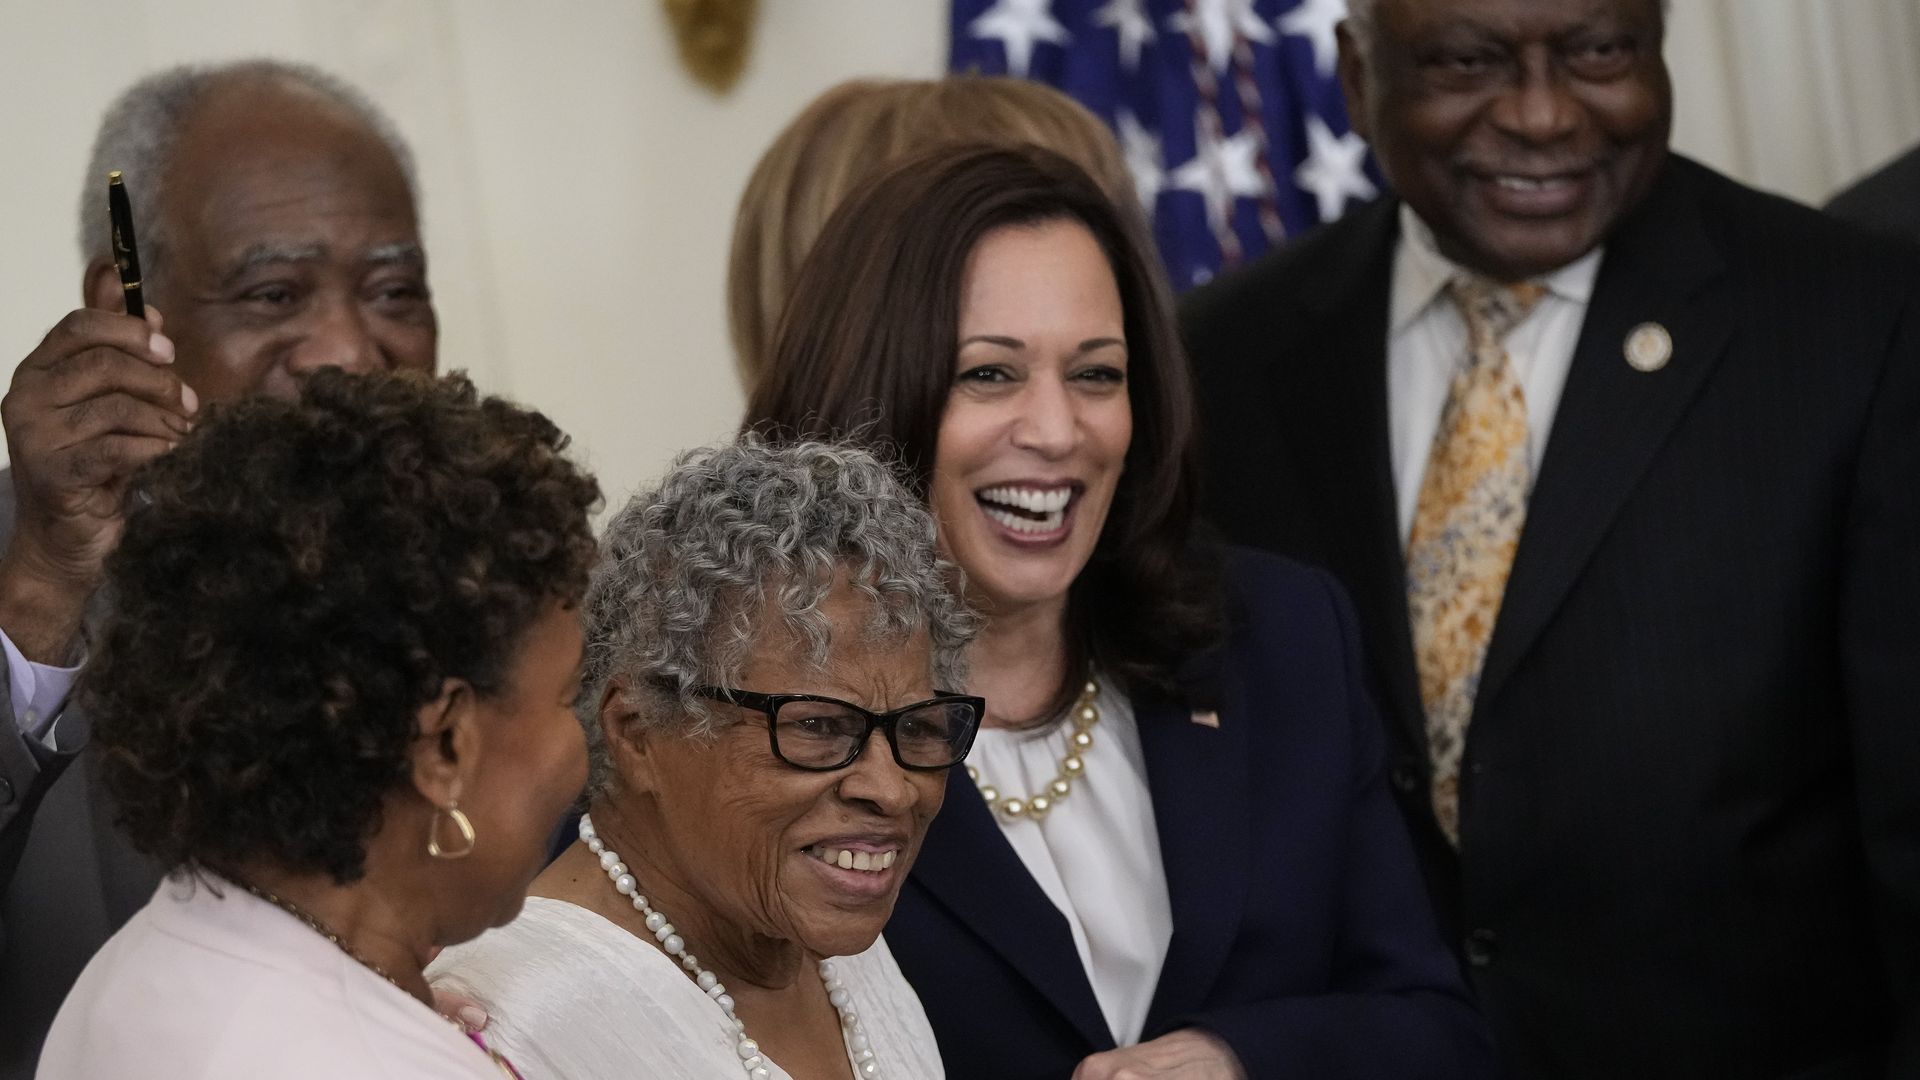 Opal Lee smiling next to the Vice President